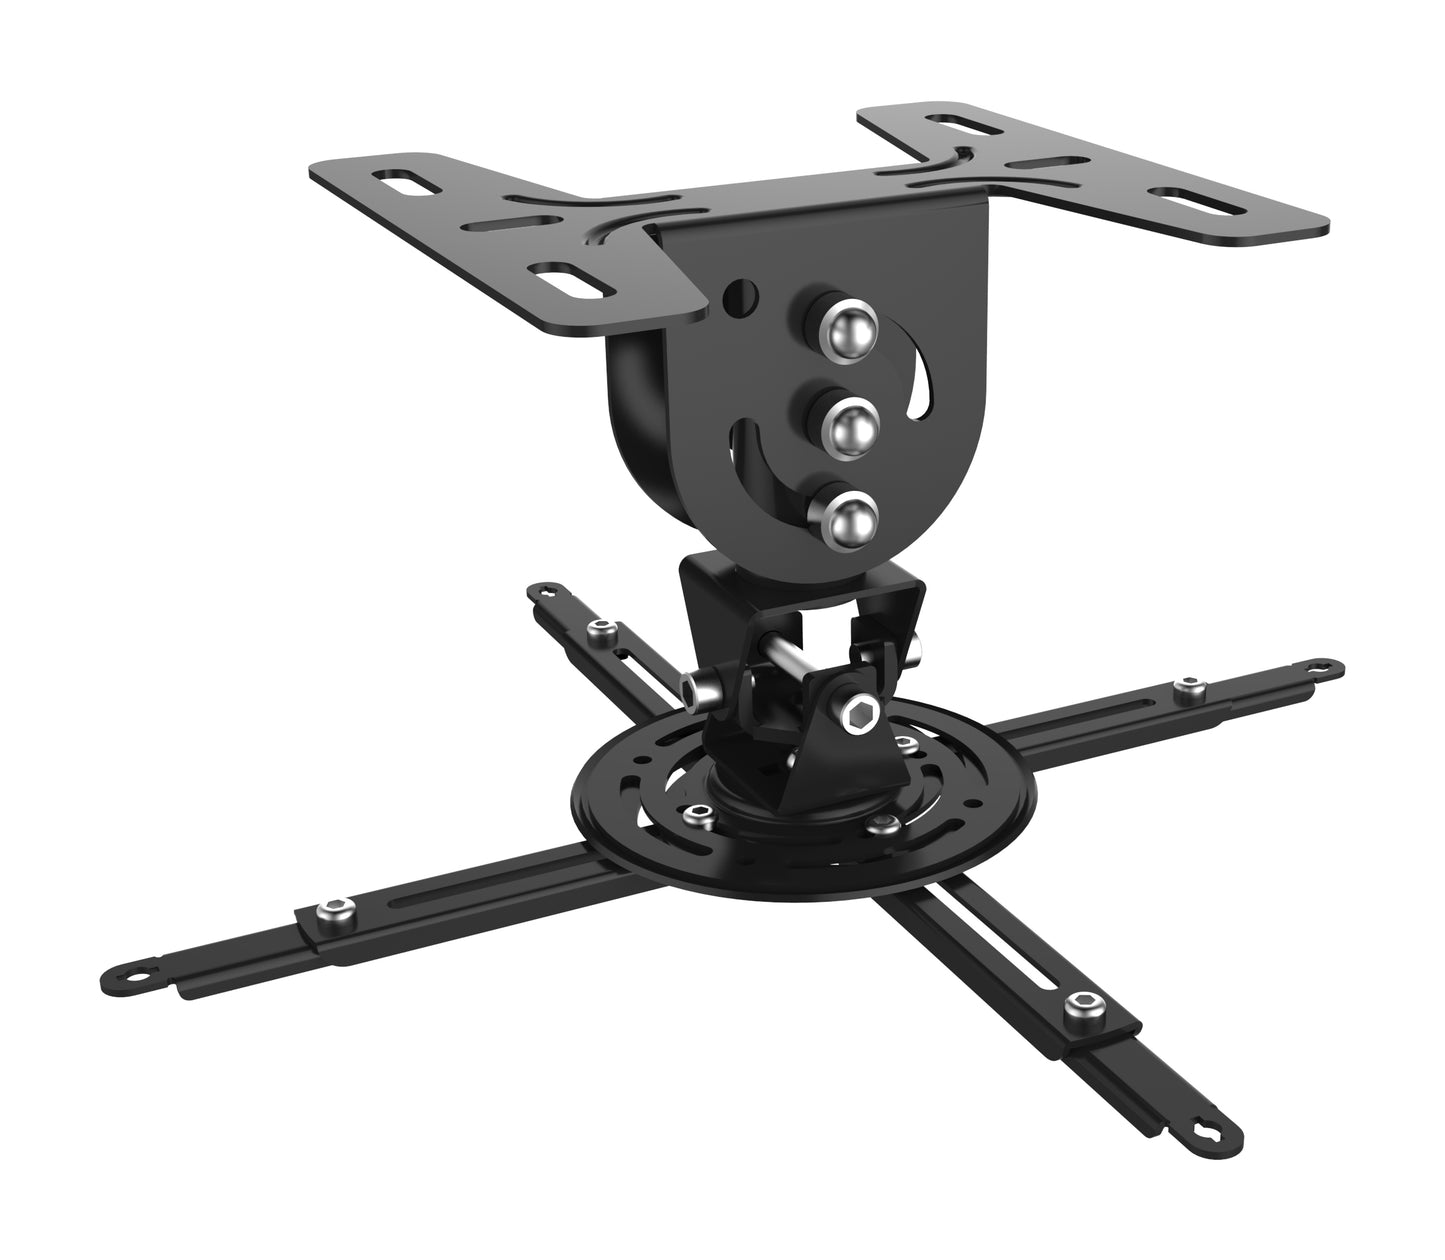 ProMounts Ceiling/Overhead Projector Mount Holds up to 44lbs (UC-PRO150)